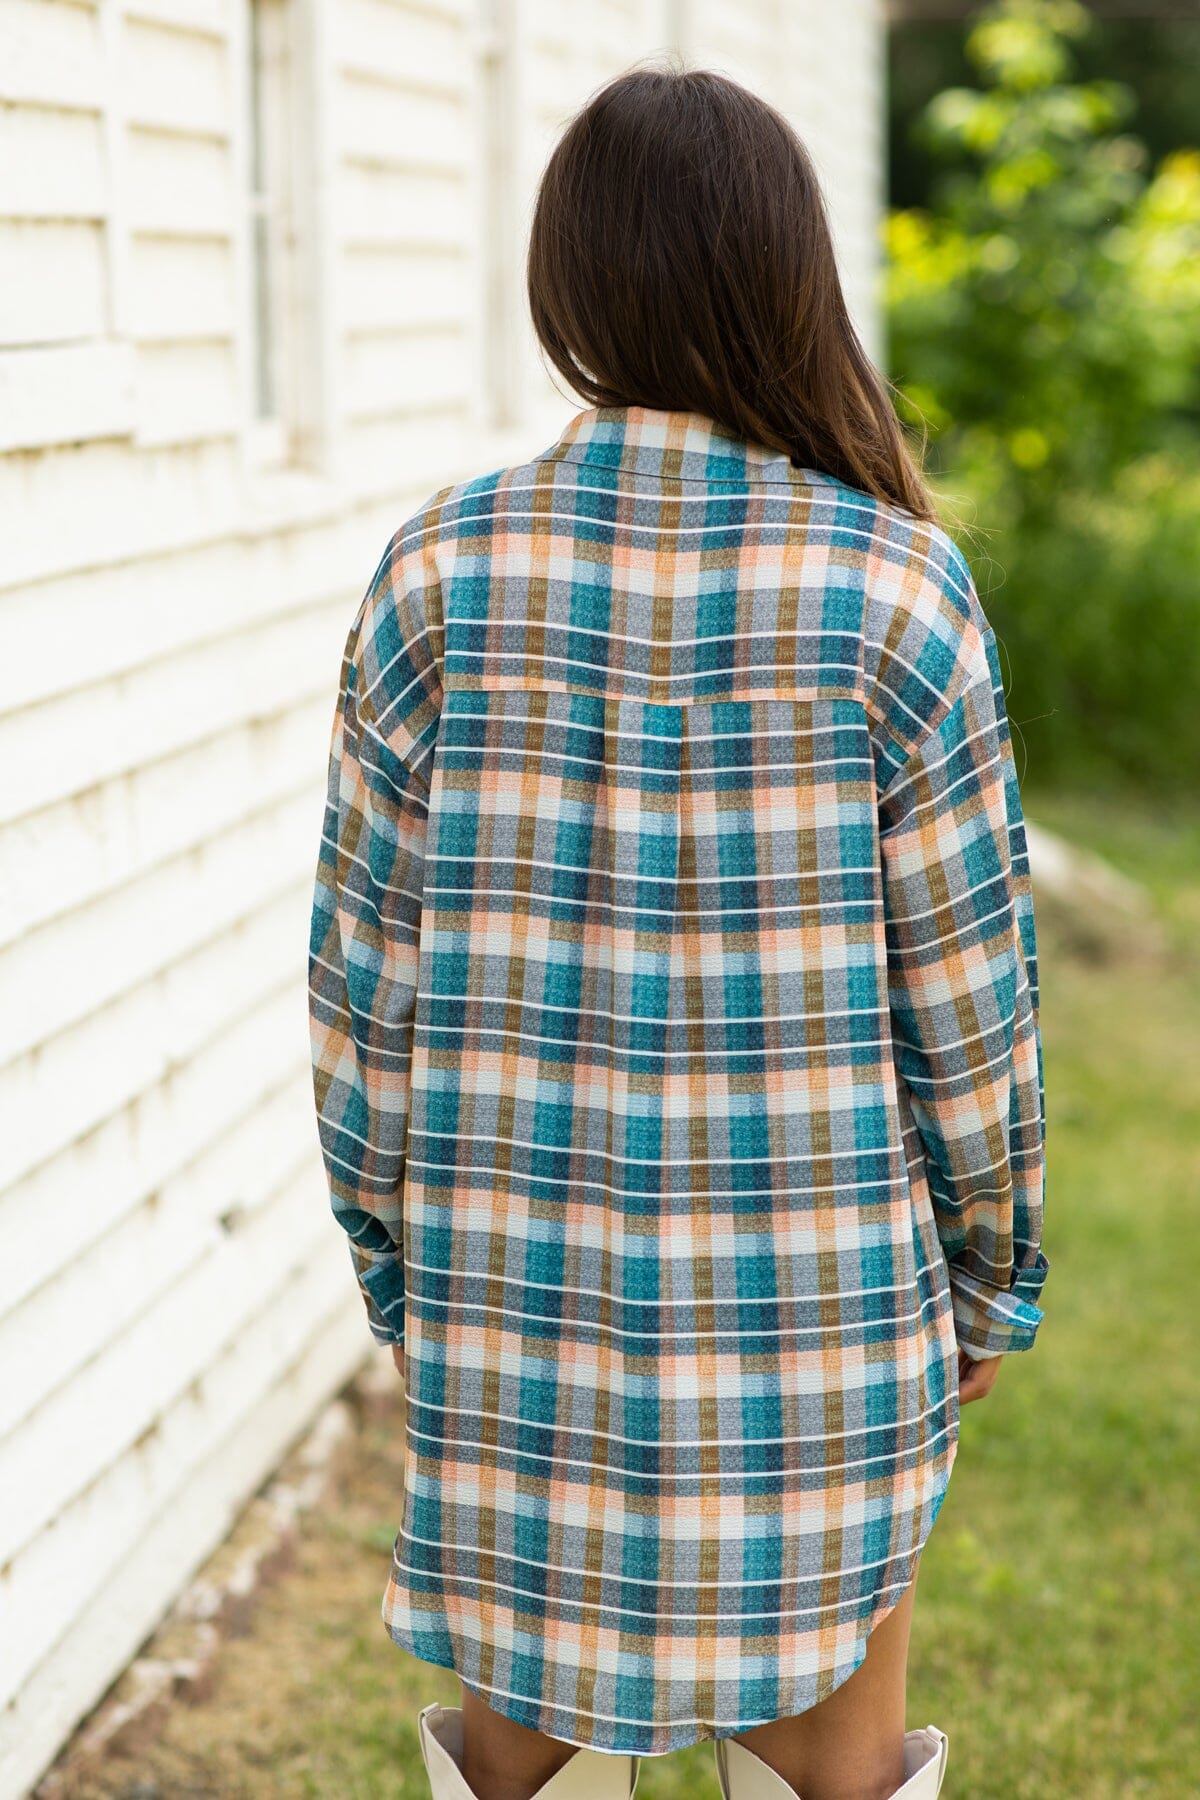 Teal and Peach Plaid Button Up Top - Filly Flair